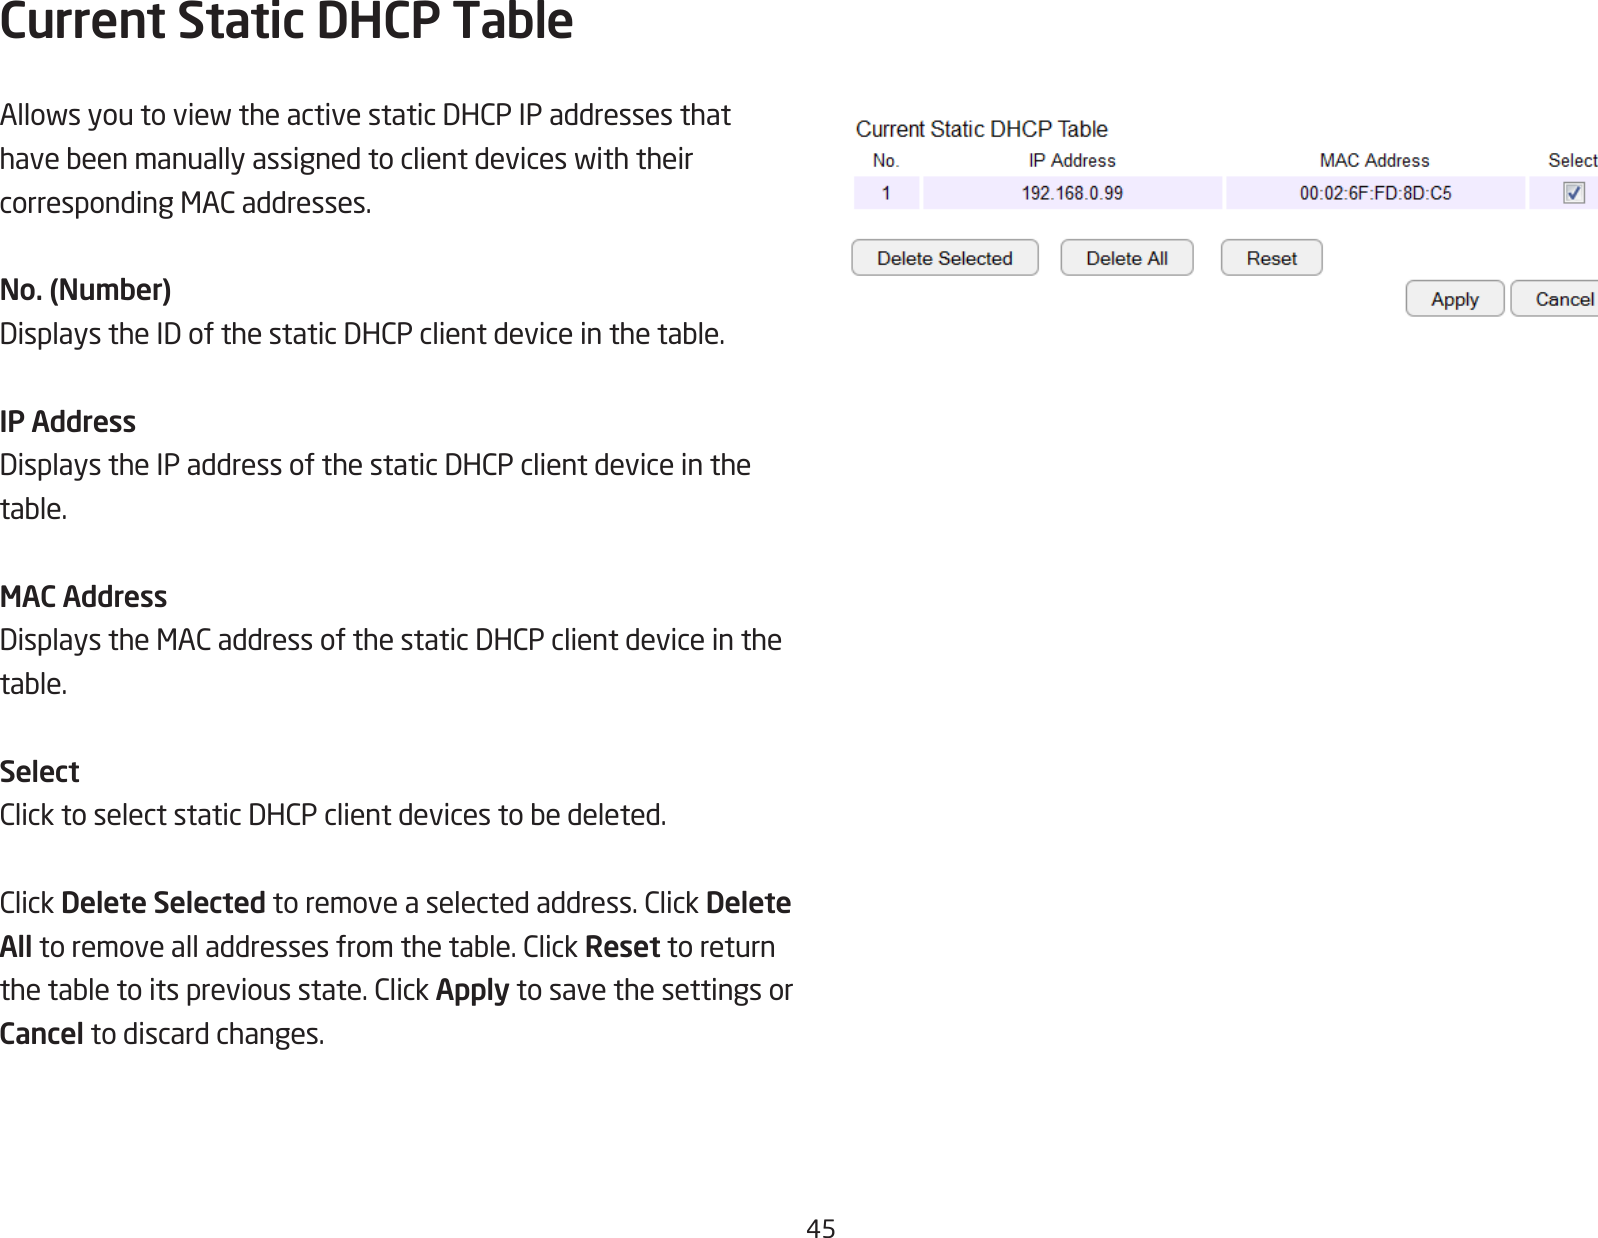 45Current Static DHCP TableAllowsyoutoviewtheactivestaticDHCPIPaddressesthathavebeenmanuallyassignedtoclientdeviceswiththeircorrespondingMACaddresses.No. (Number)DisplaystheIDofthestaticDHCPclientdeviceinthetable.IP AddressDisplaystheIPaddressofthestaticDHCPclientdeviceinthetable.MAC AddressDisplaystheMACaddressofthestaticDHCPclientdeviceinthetable.SelectClicktoselectstaticDHCPclientdevicestobedeleted.ClickDelete Selectedtoremoveaselectedaddress.ClickDelete All toremovealladdressesfromthetable.ClickReset to return thetabletoitspreviousstate.ClickApply to save the settings or Cancel to discard changes.